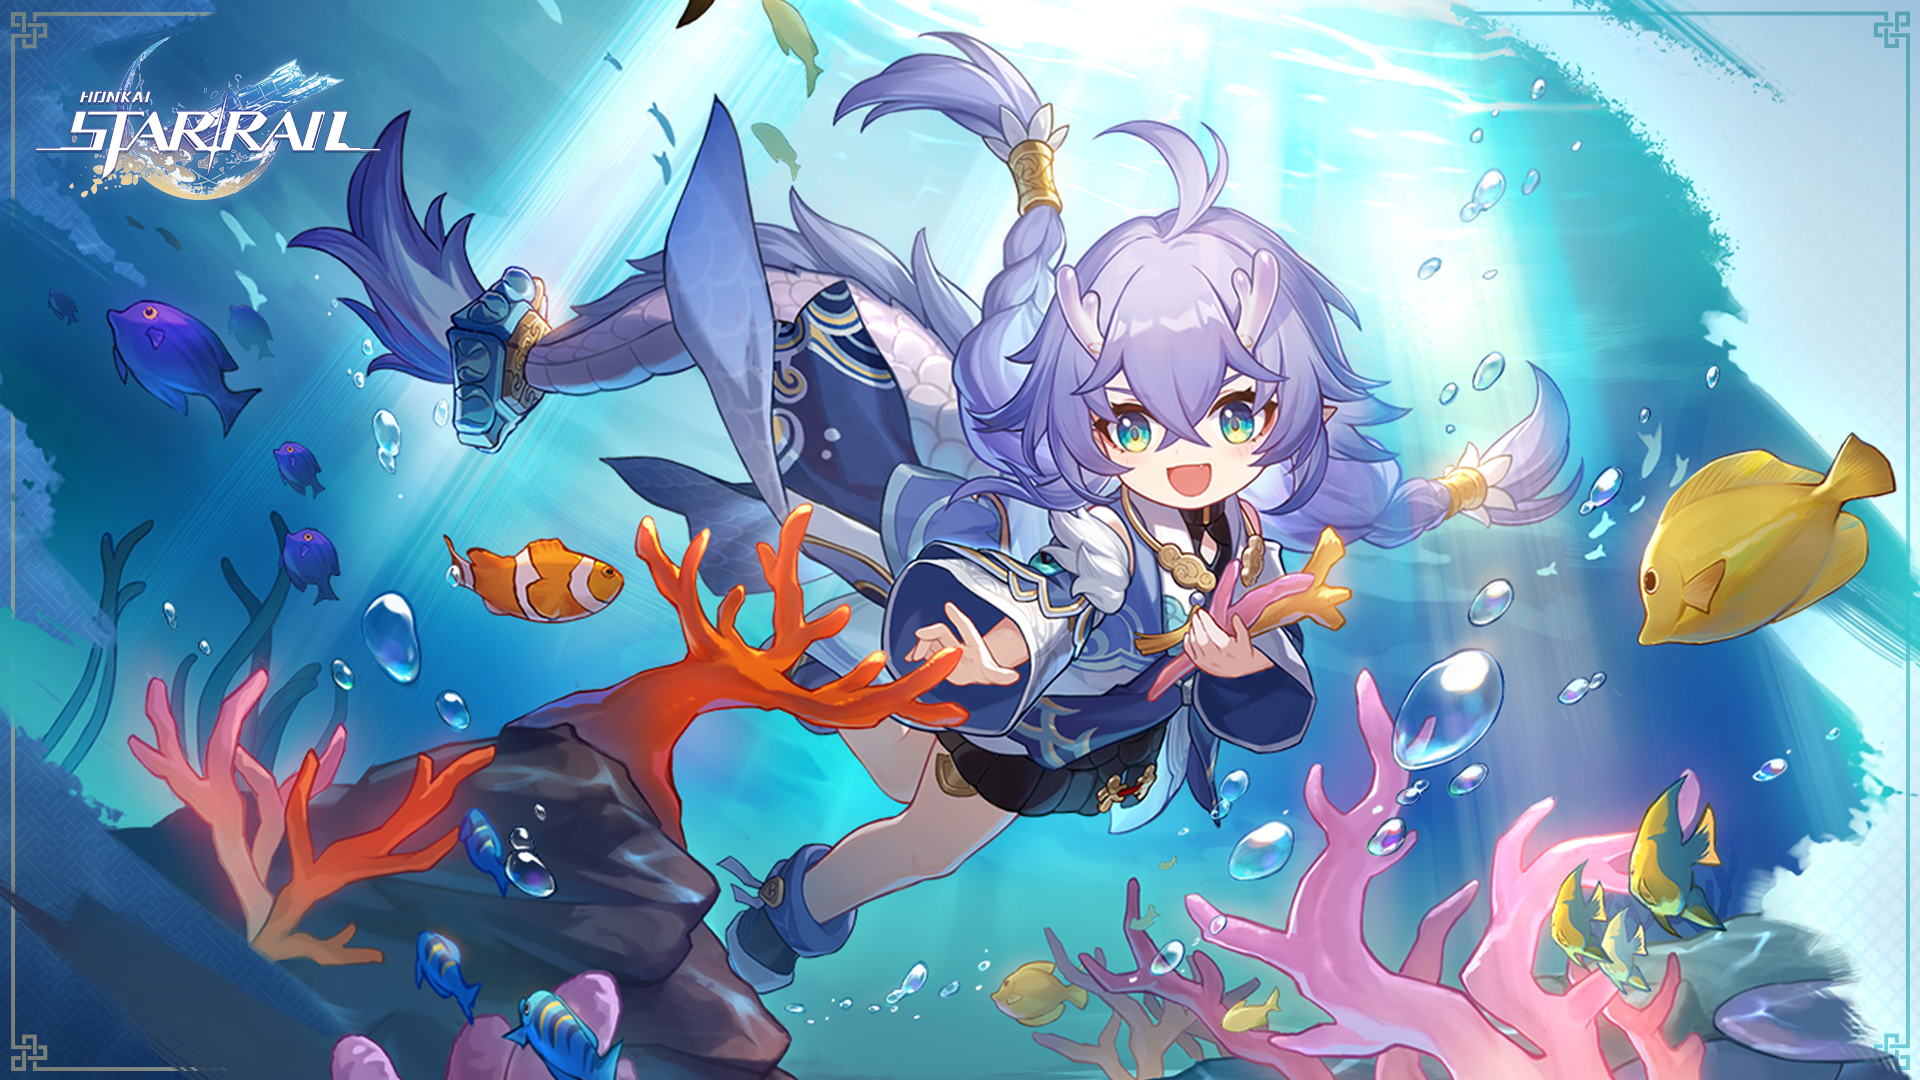 Honkai: Star Rail Is The New RPG Everyone Is Talking About